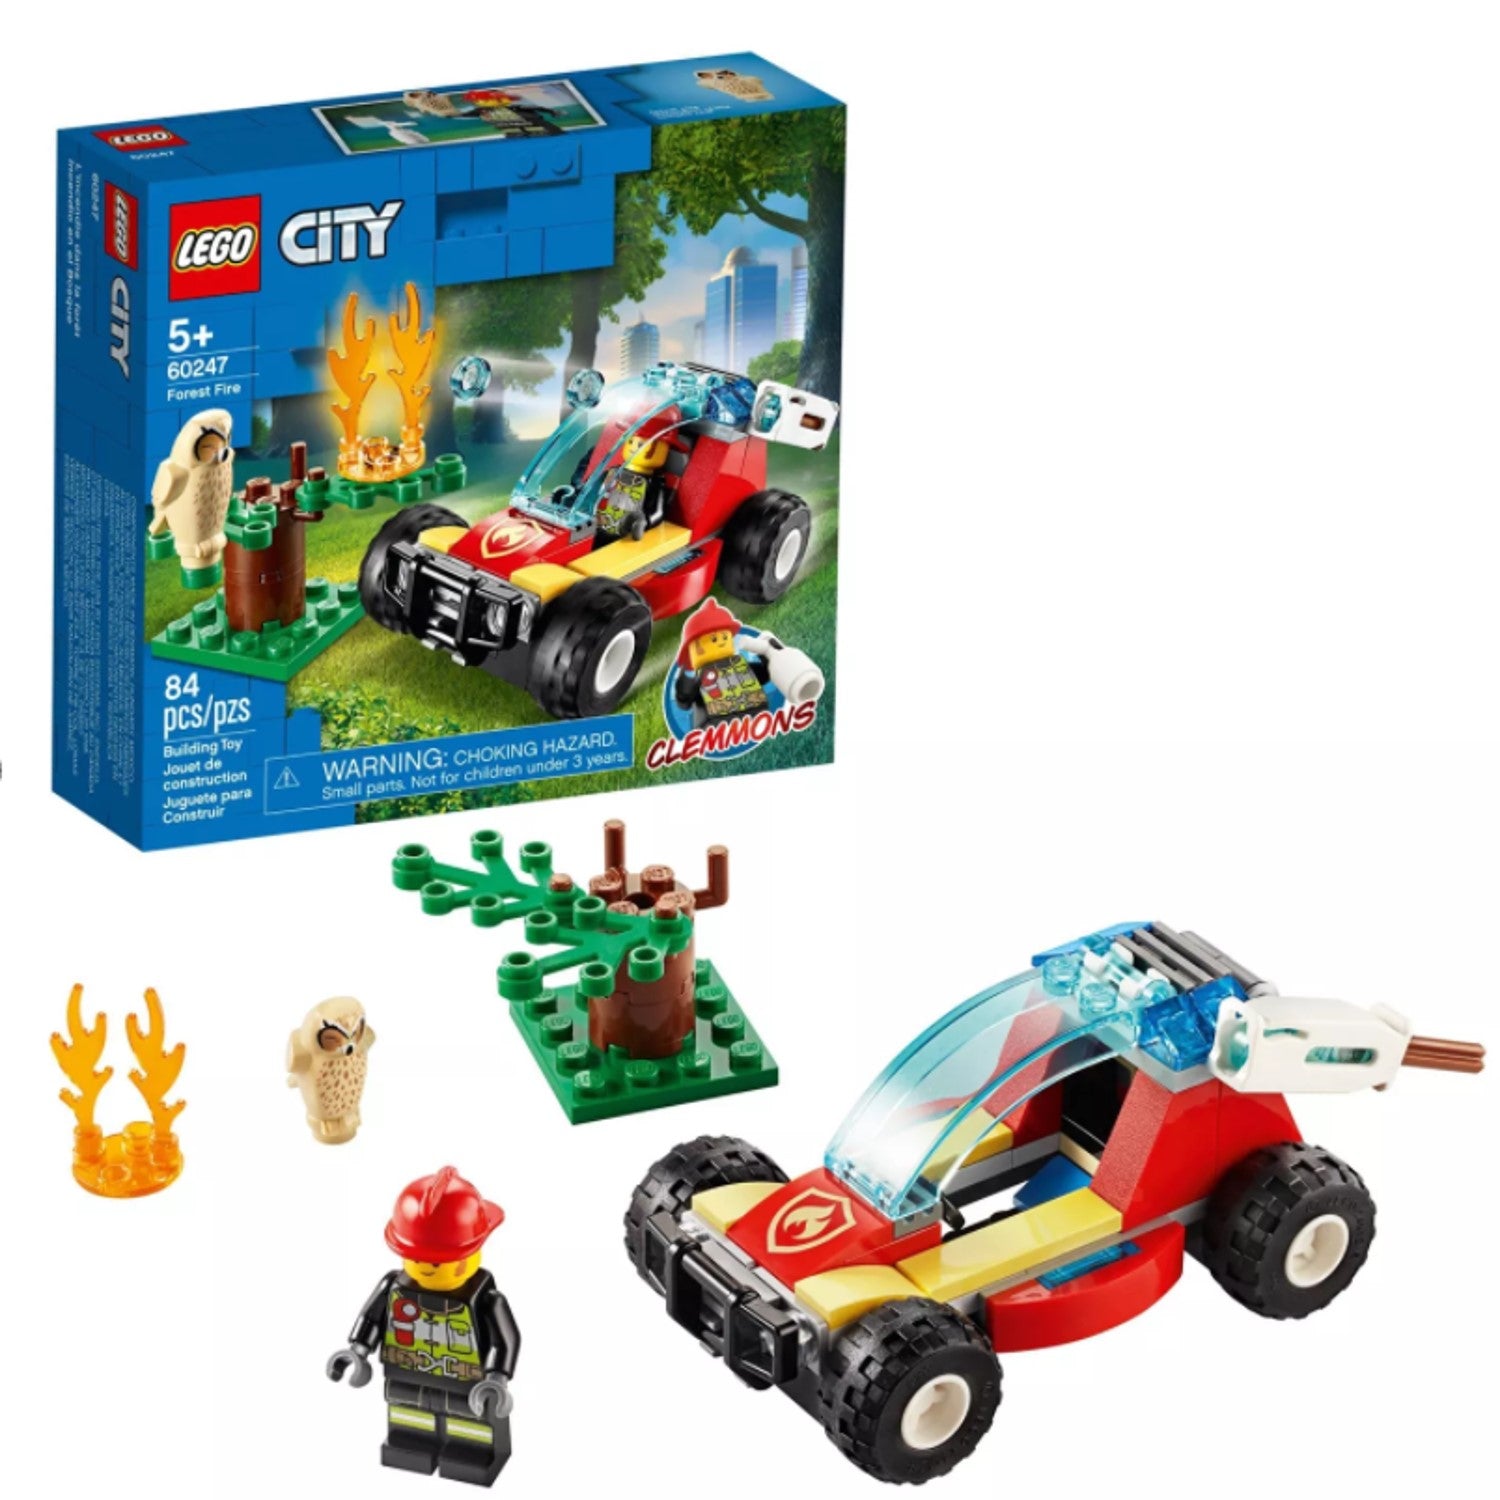 Scully Awaken Ellers Lego City Super Pack 2 in 1 66637 Building Toy for Kids 173 Pieces –  moongoodsusa